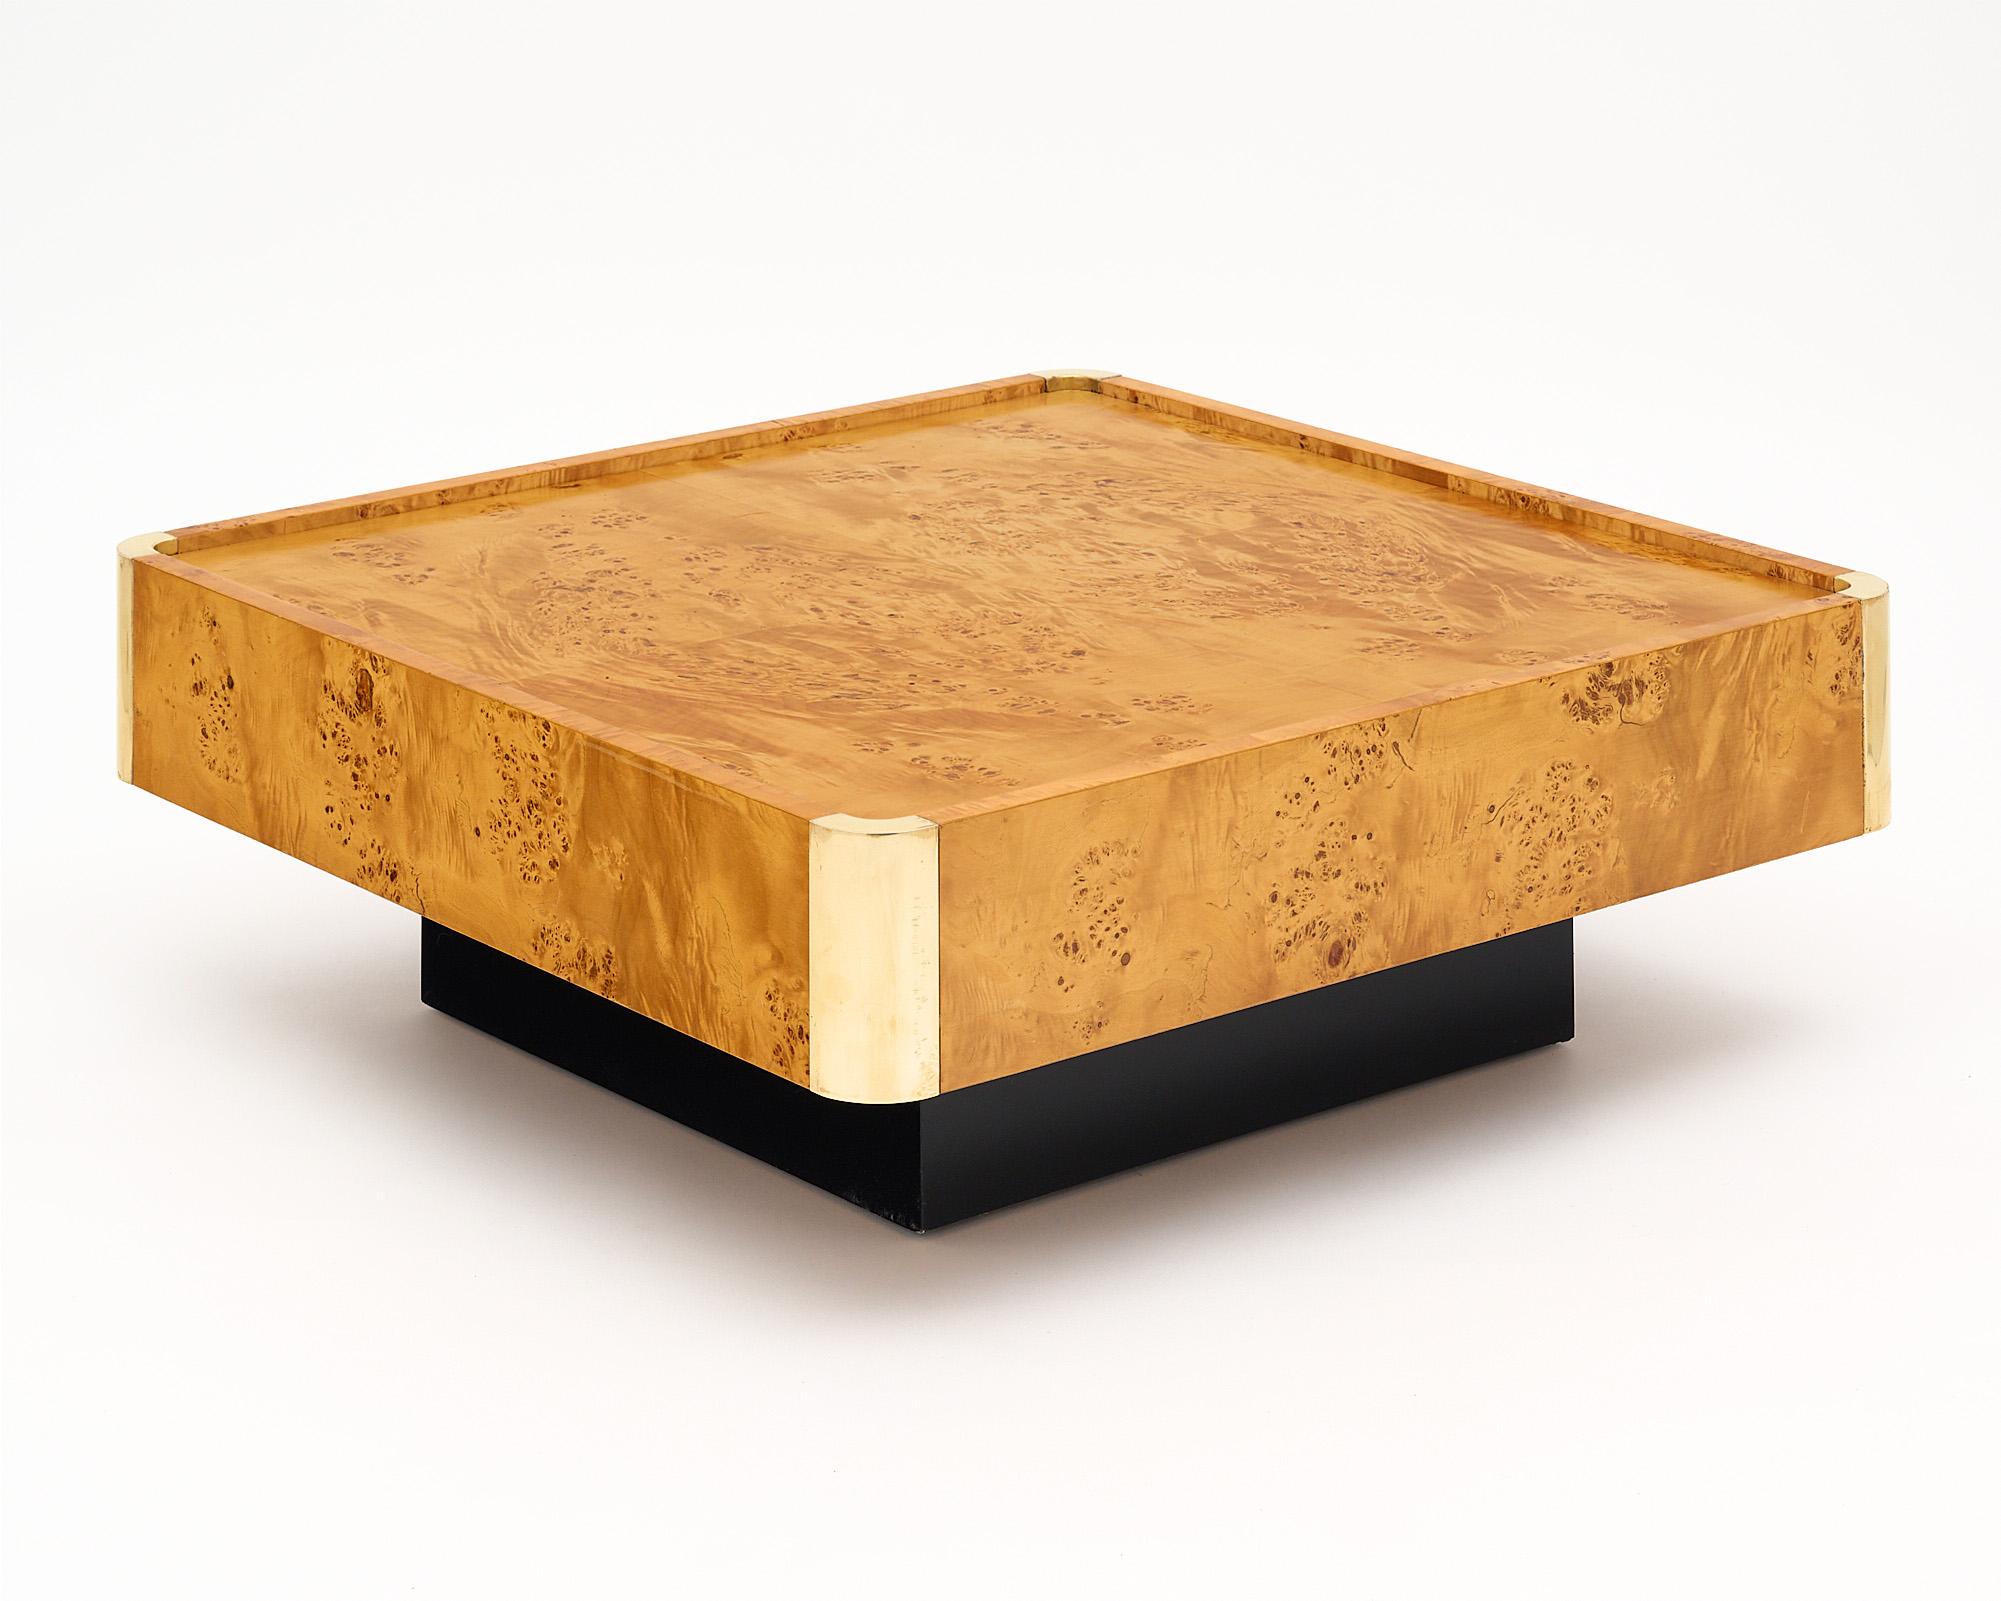 Vintage coffee table from France designed by Jean-Claude Mahey. This piece has a burled ash veneer and each curved corner is capped in brass. The top insets for added functionality. The base has been ebonized and the whole piece is finished with a